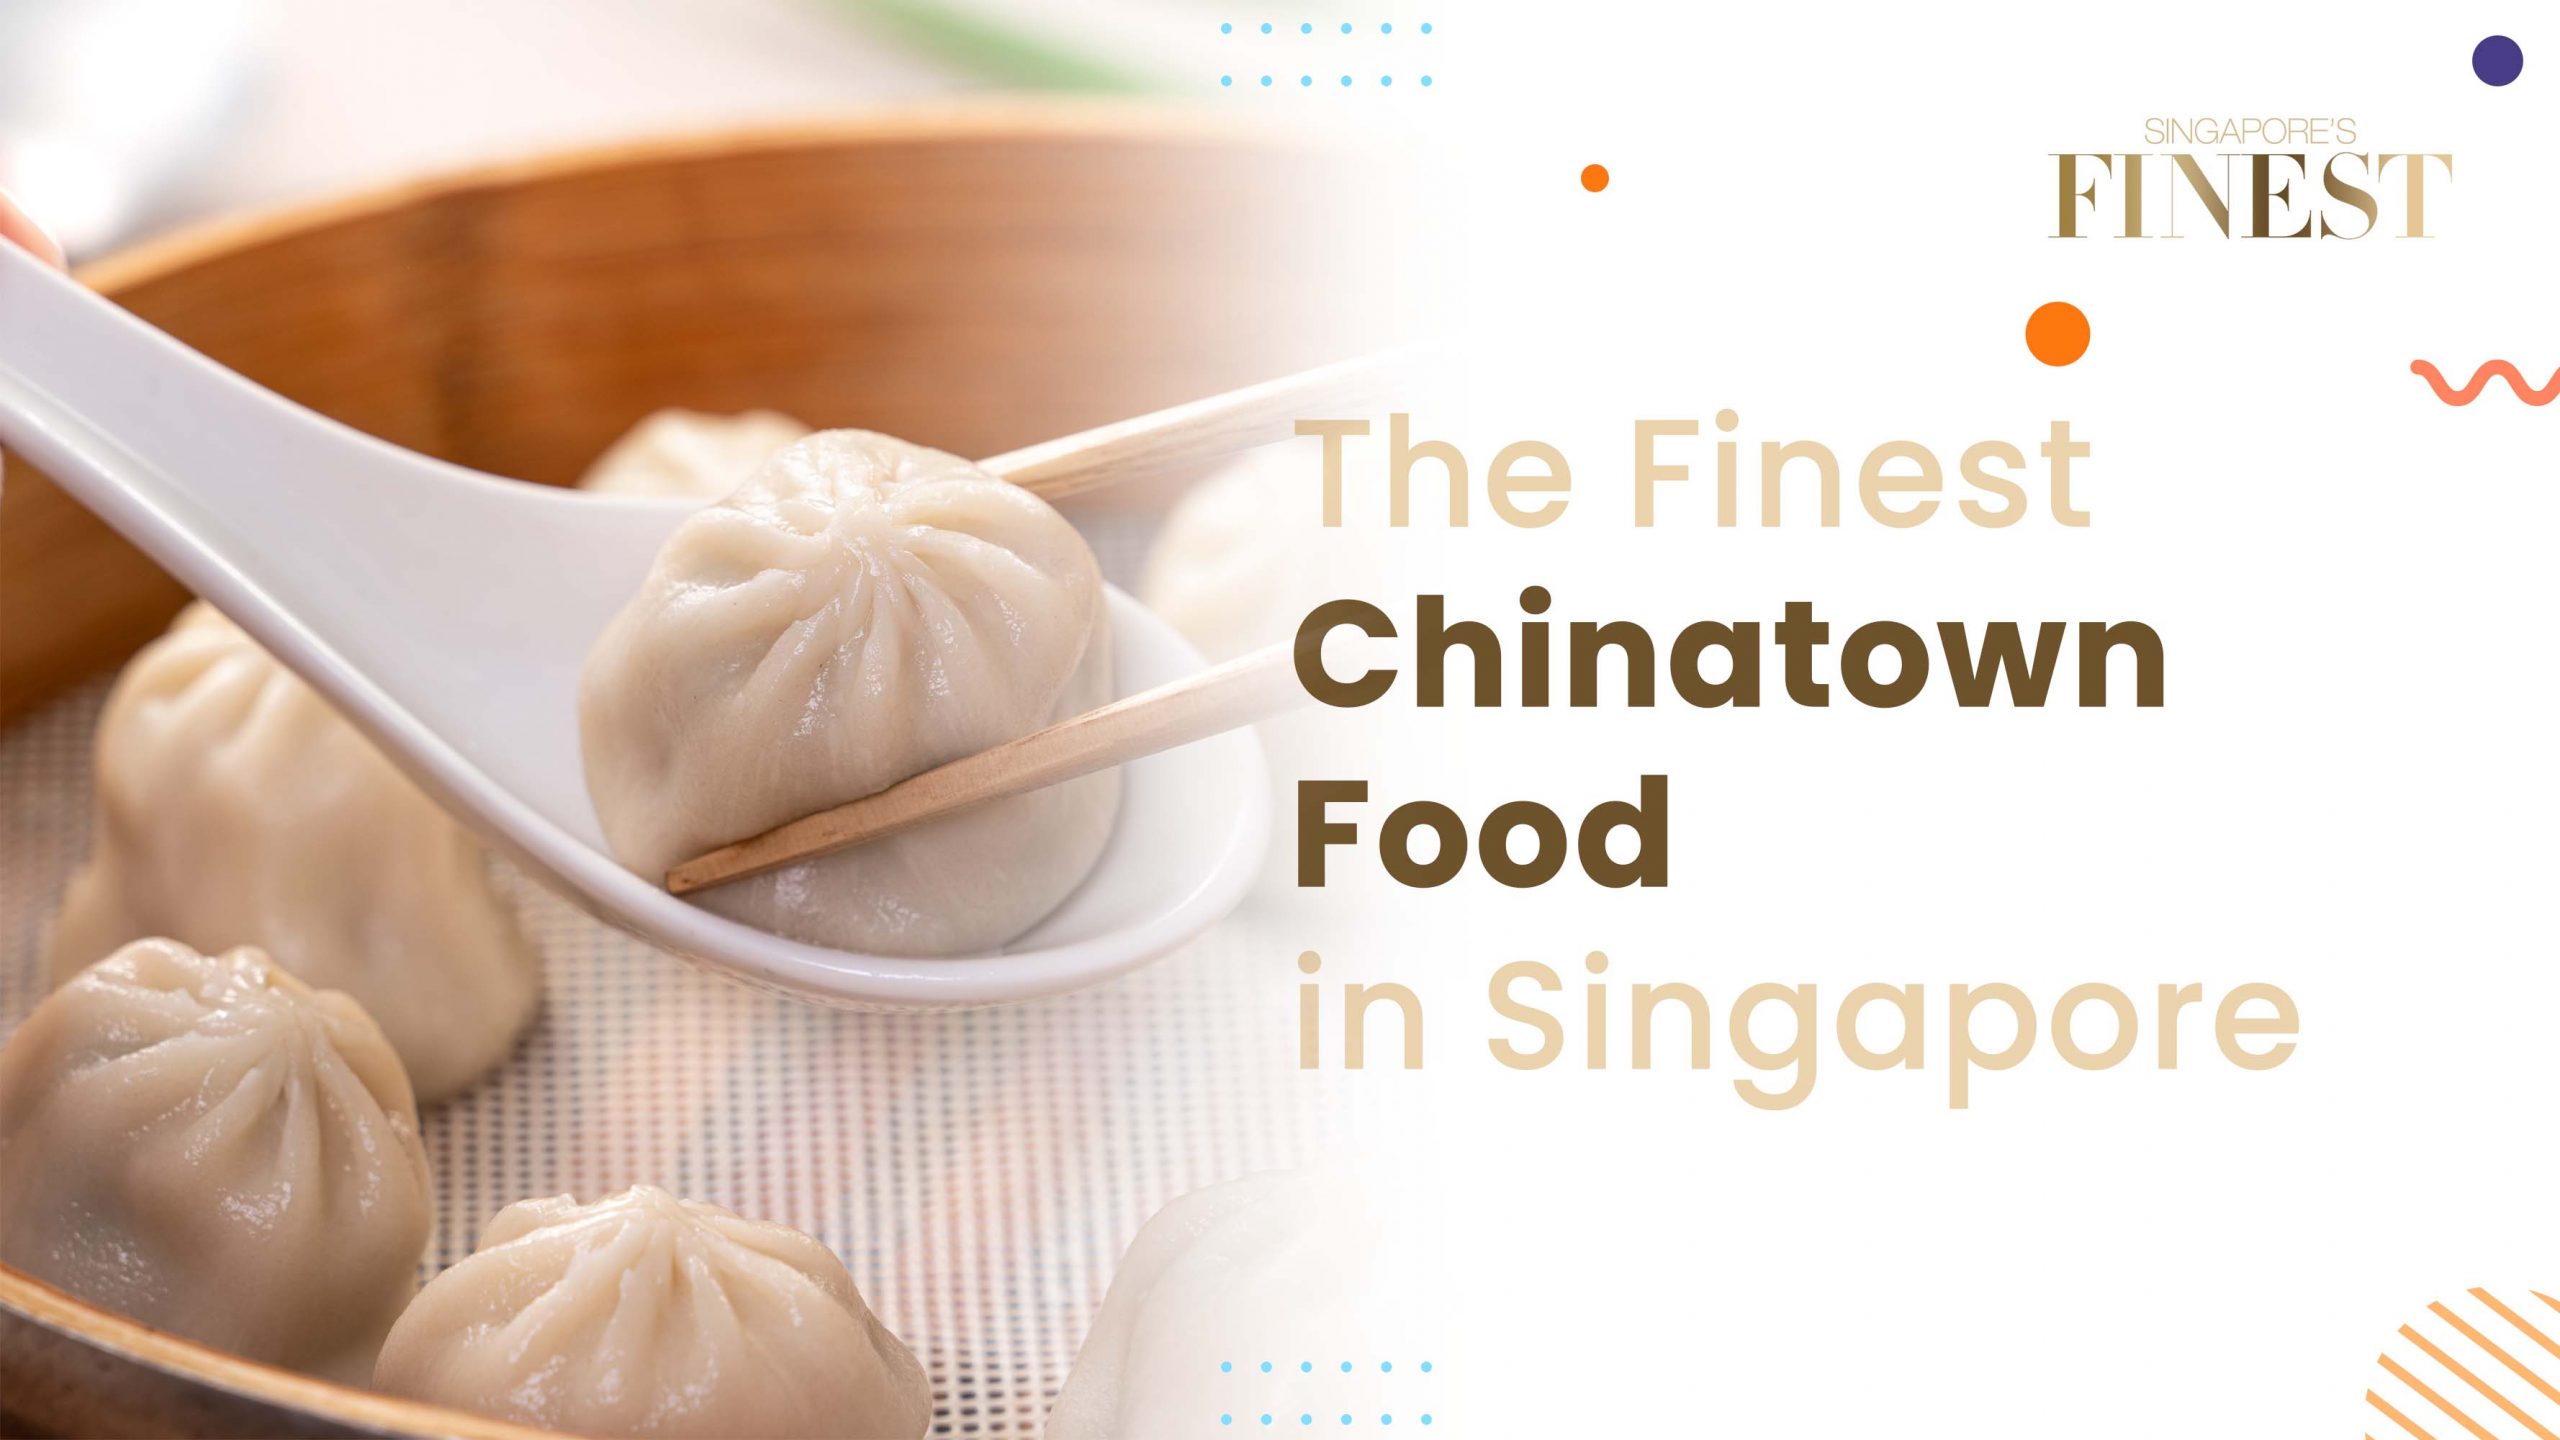 Finest Chinatown Food in Singapore